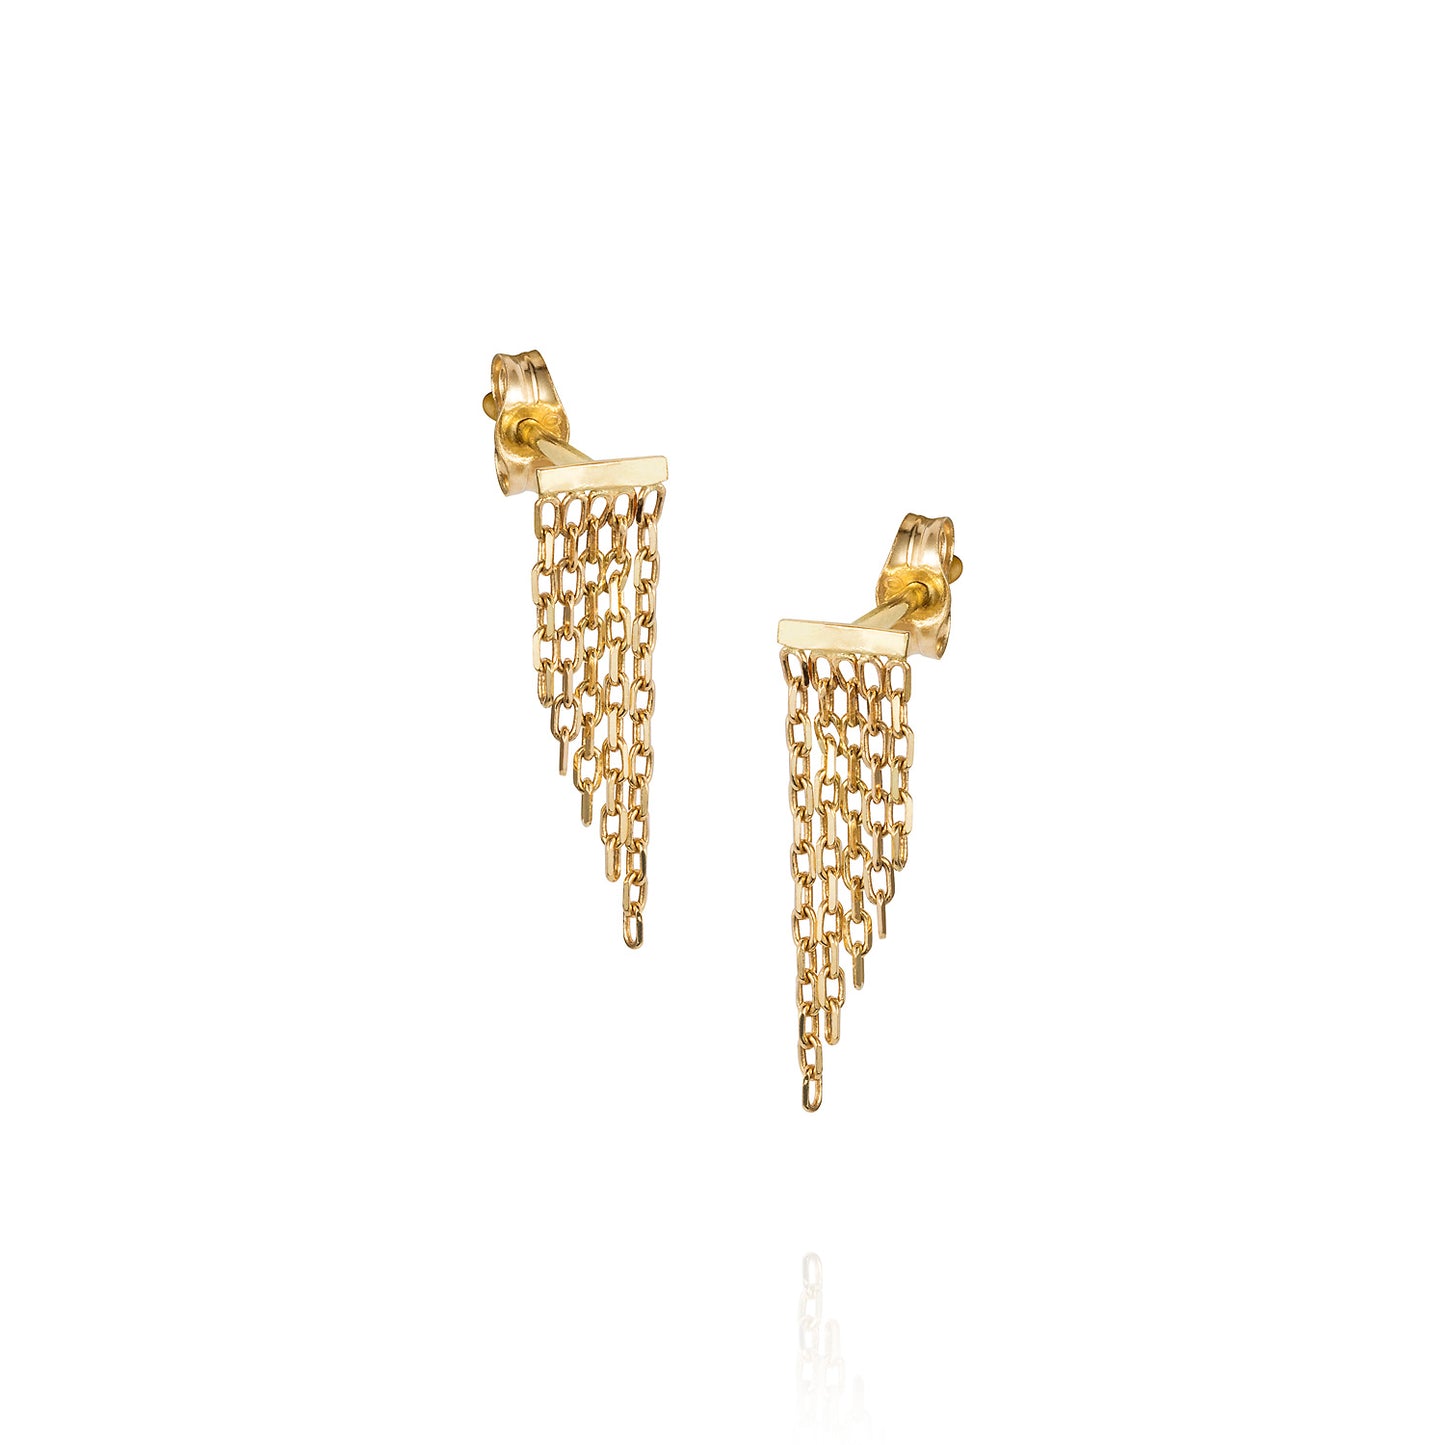 18ct yellow gold small studs with sloped fringe